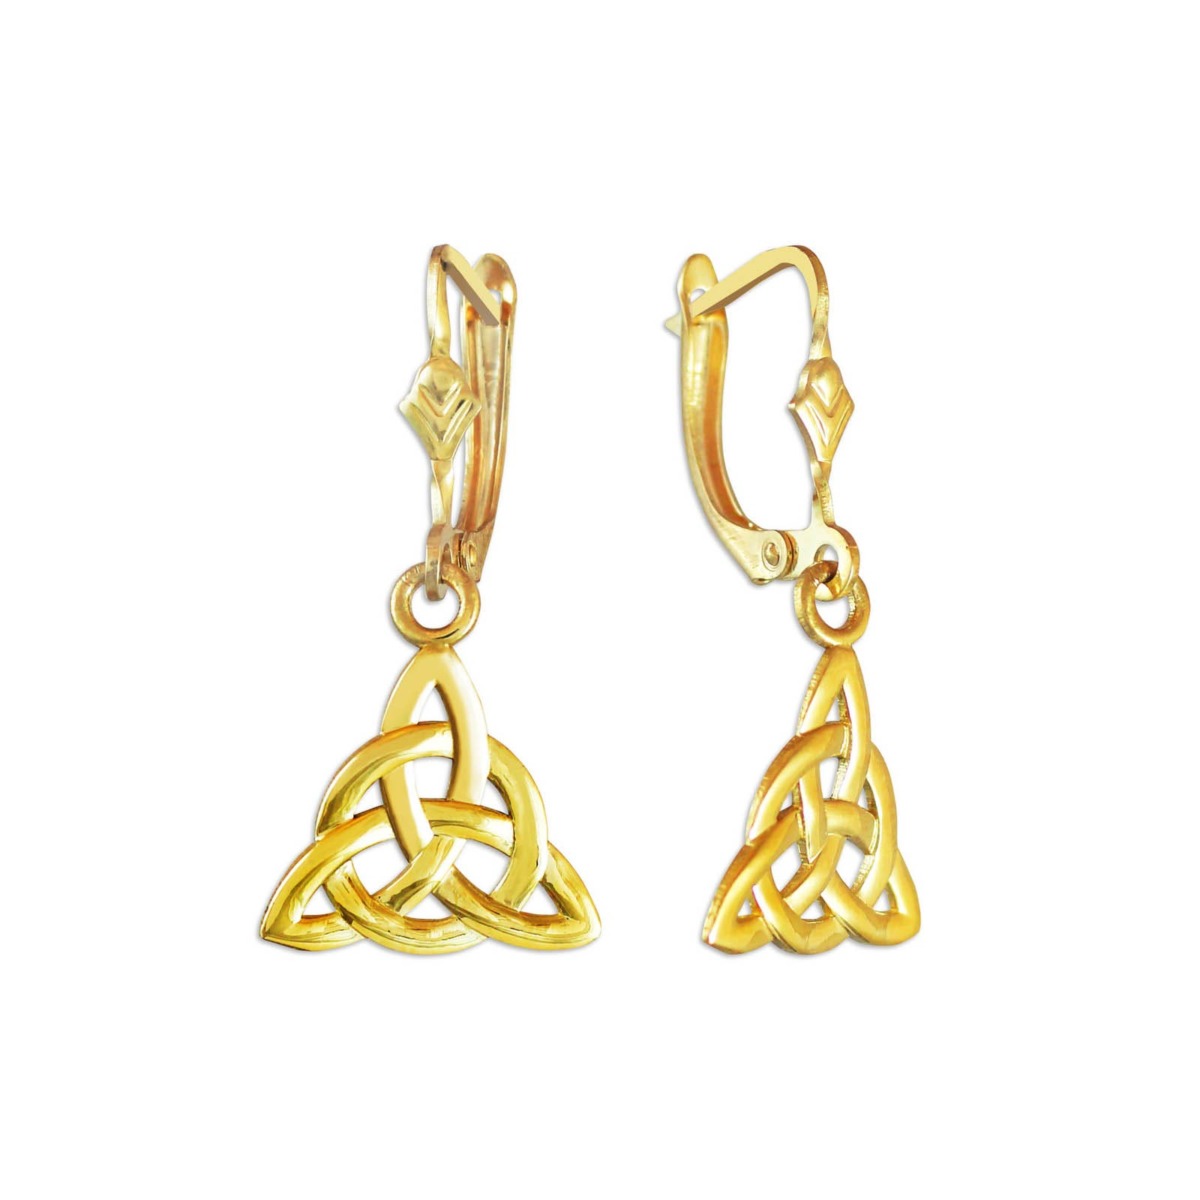 Gold Boutique - Gents Earrings in Gold GOOFASH